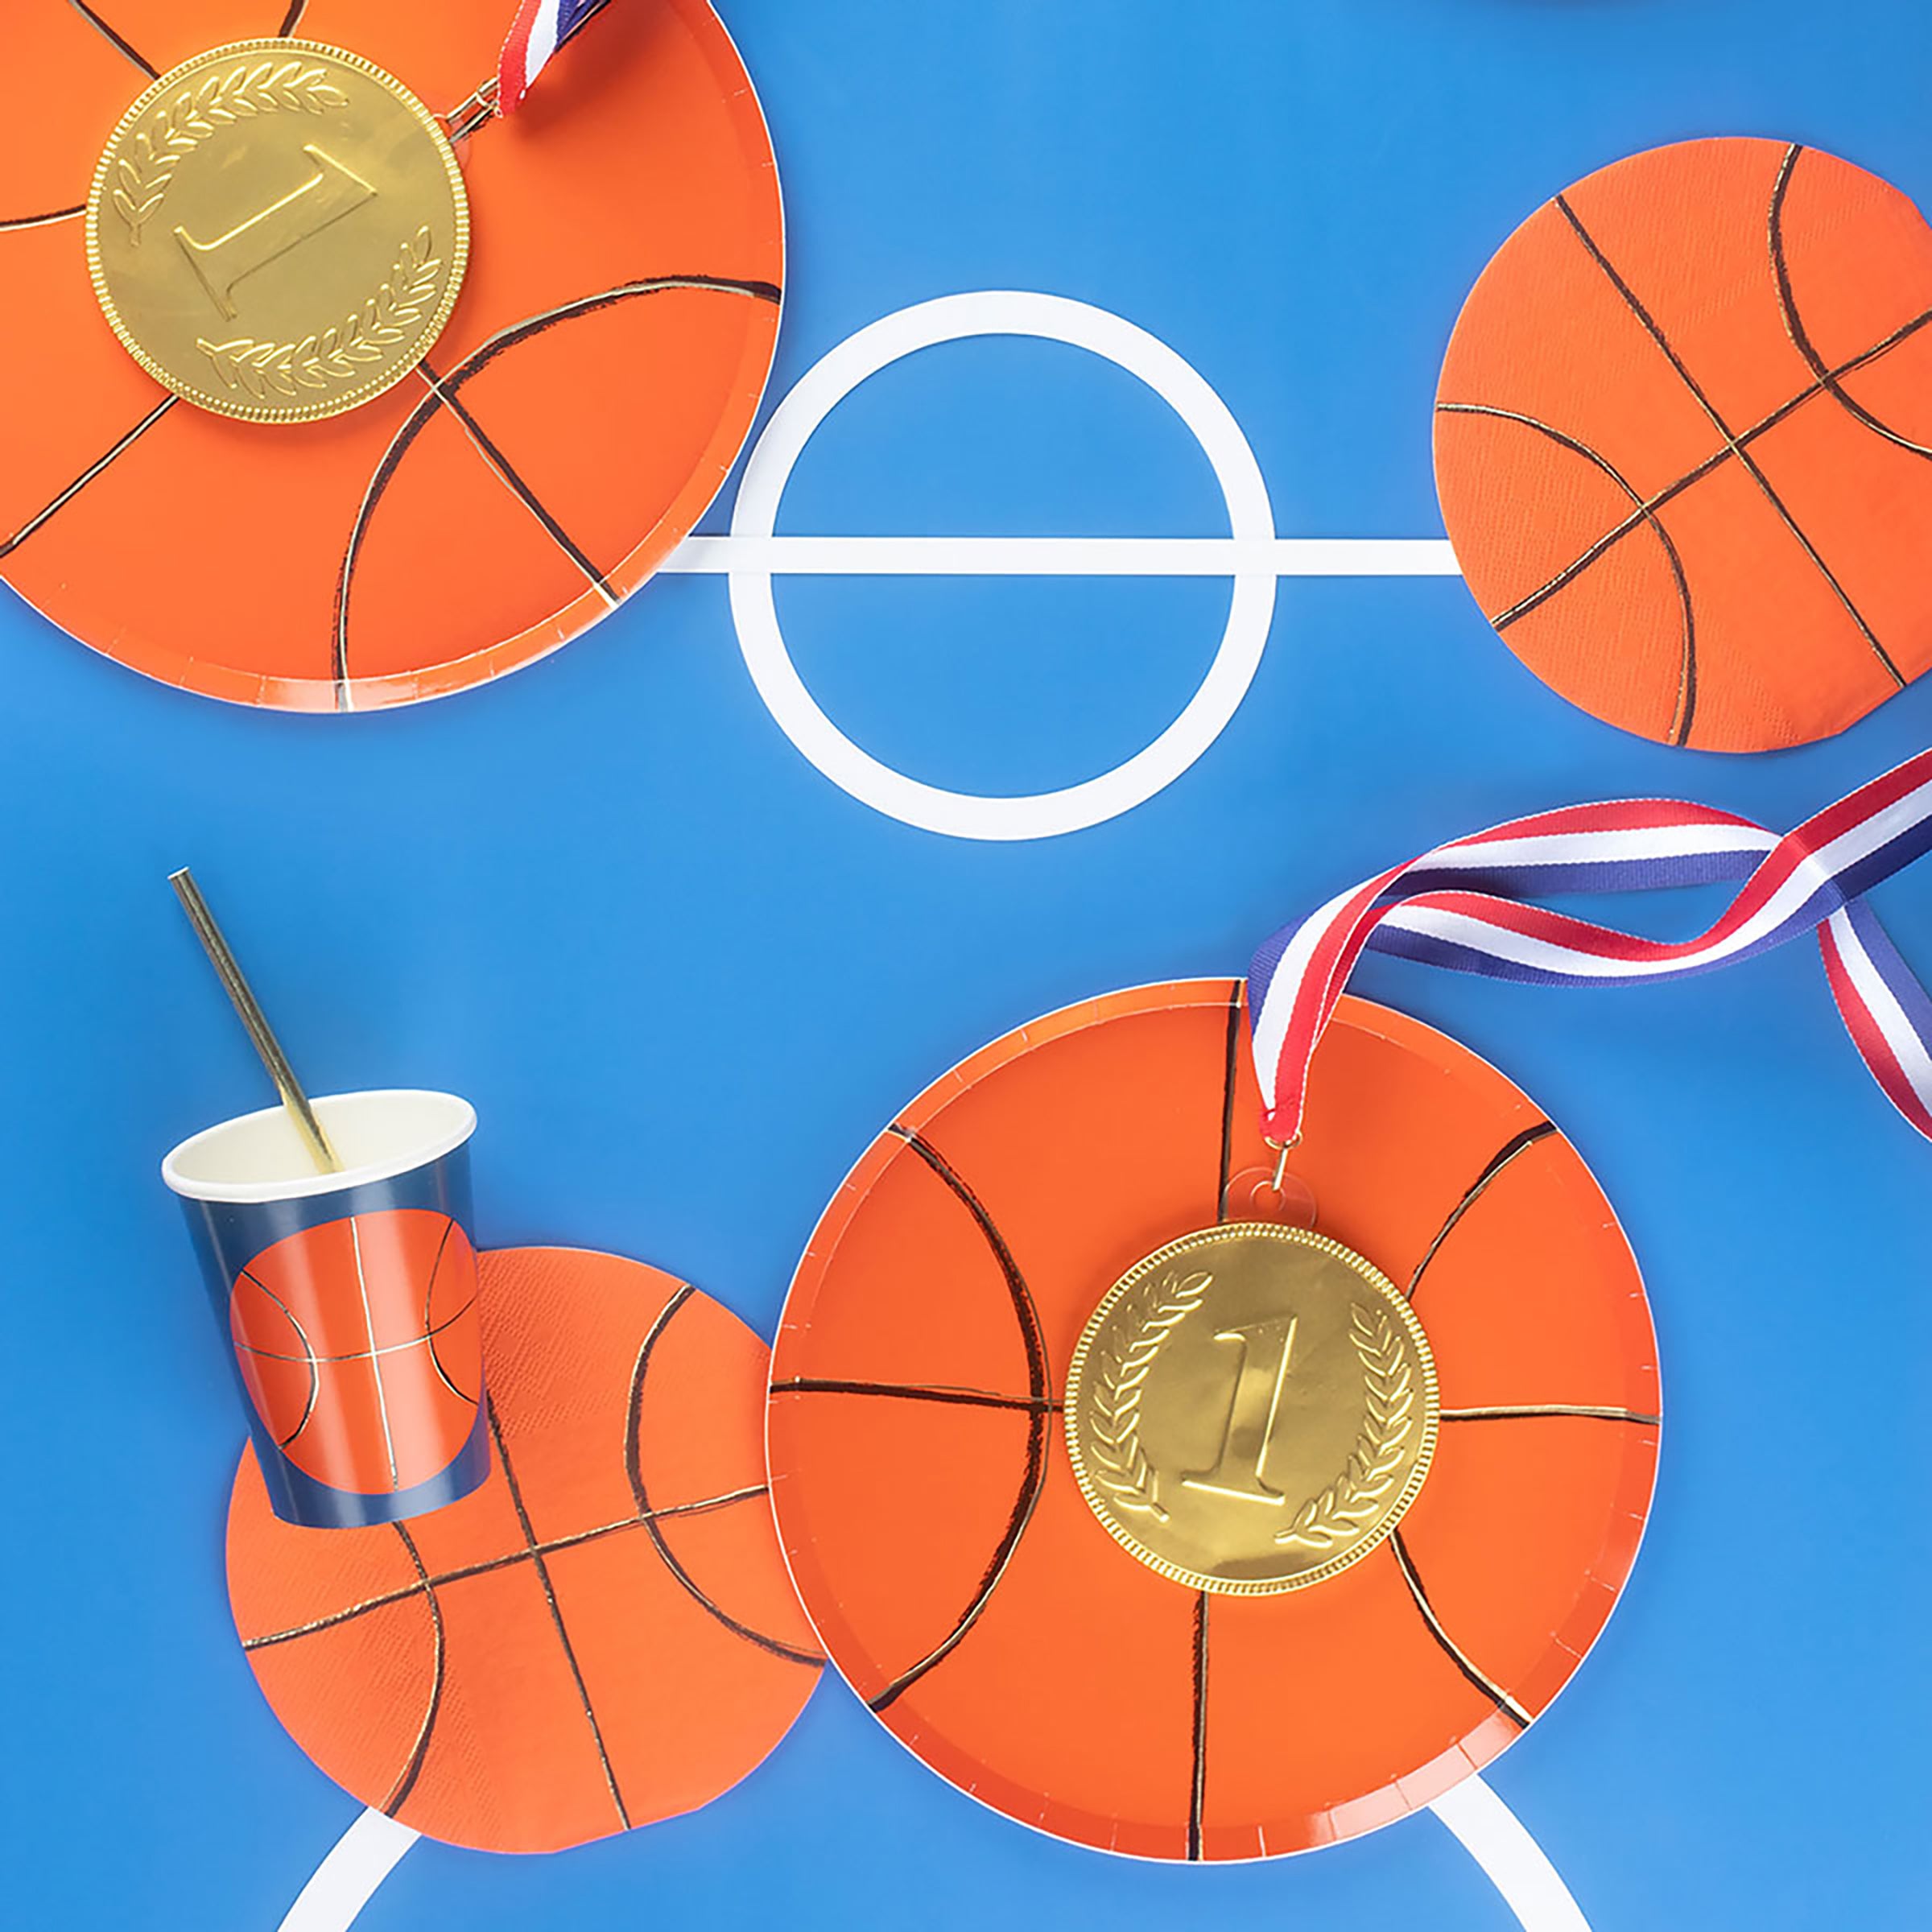 Our party plates, in the shape of a basketball with gold foil details, are perfect for basketball party supplies.